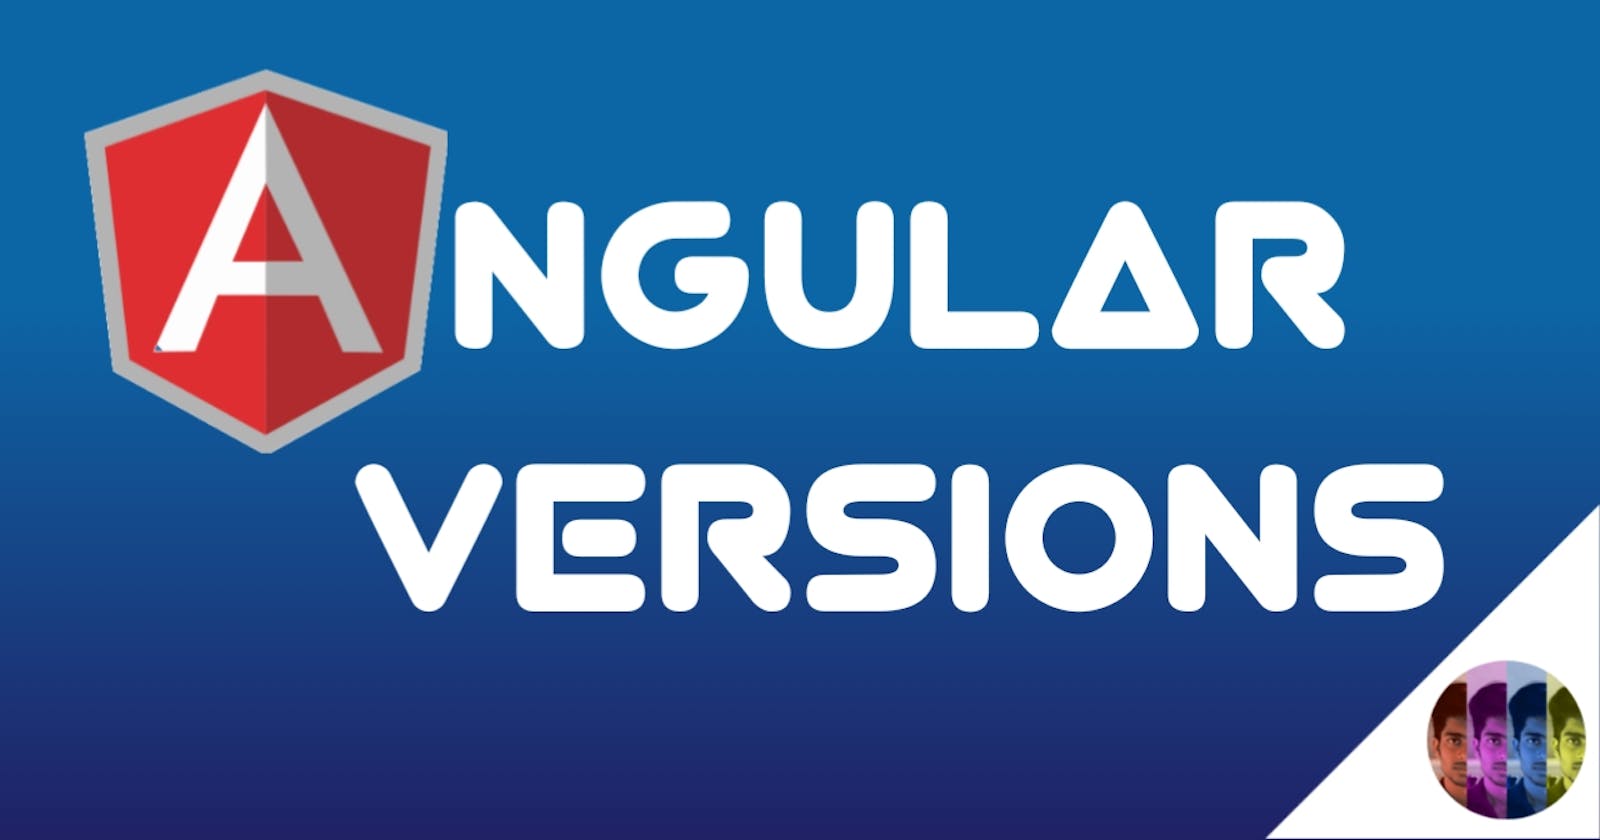 Let's understand different versions of Angular